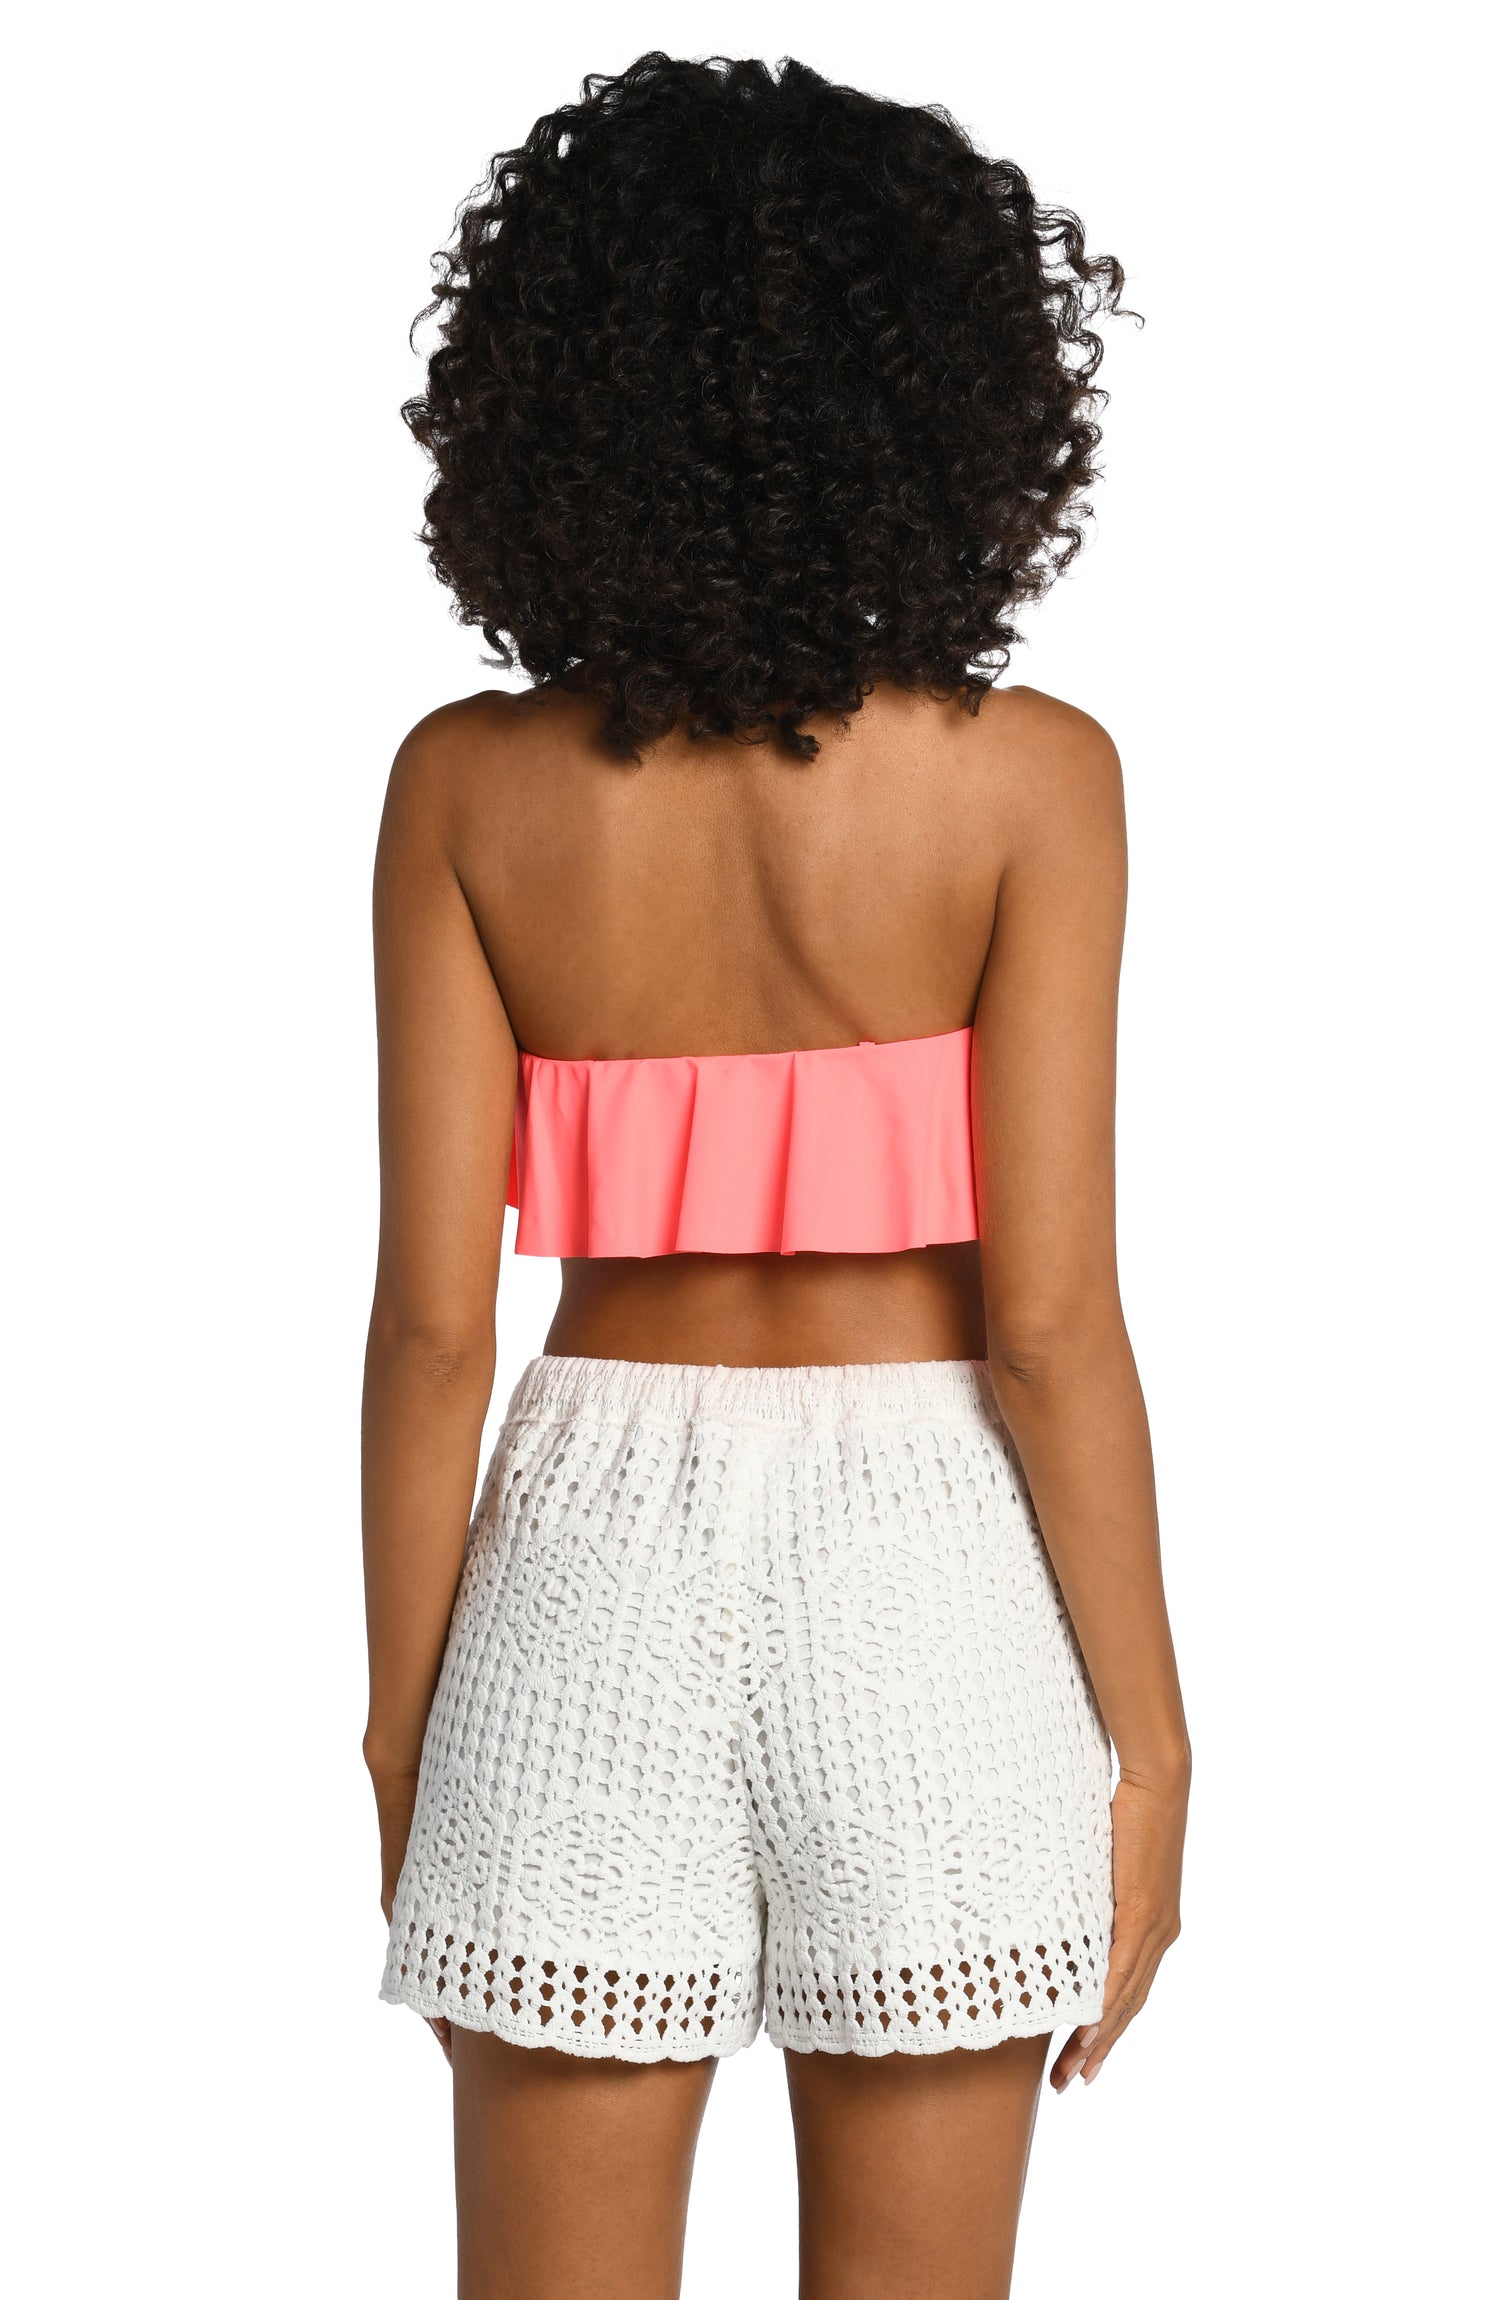 Model is wearing a solid ivory colored crochet beach shorts from our Waverly Covers collection.